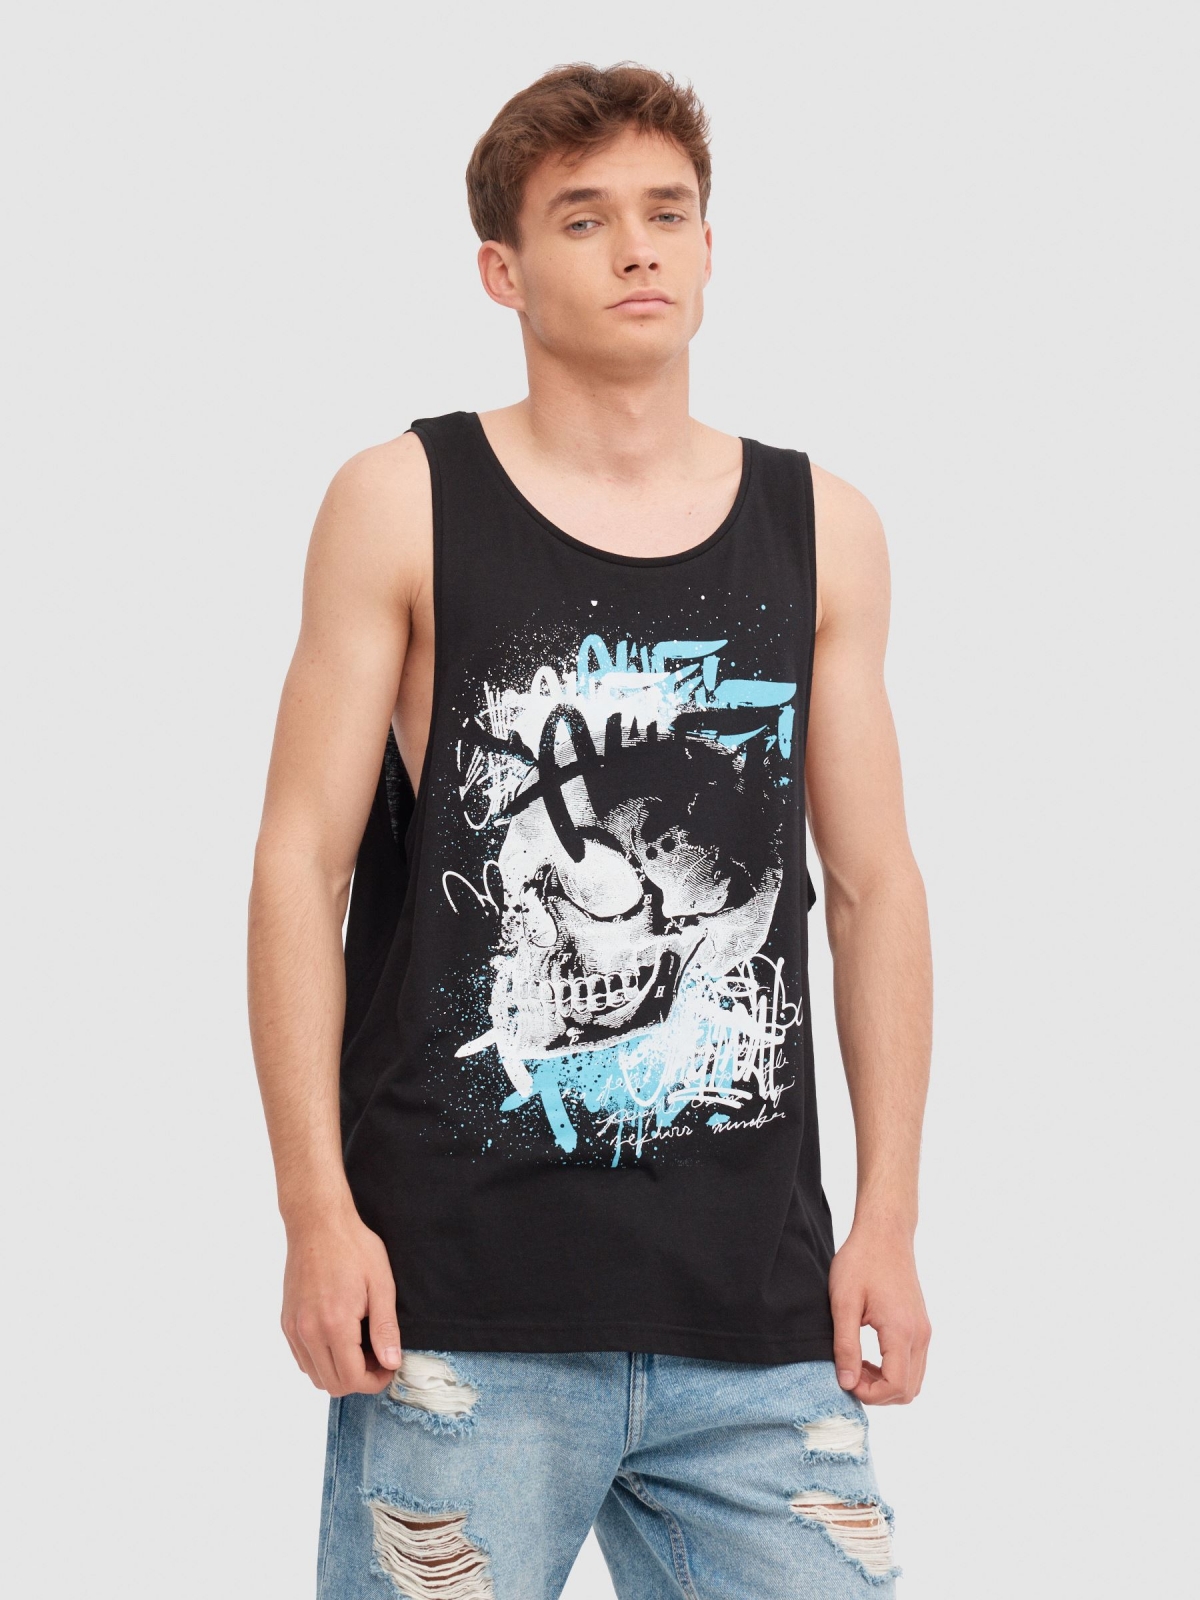 Skull tank top black middle front view